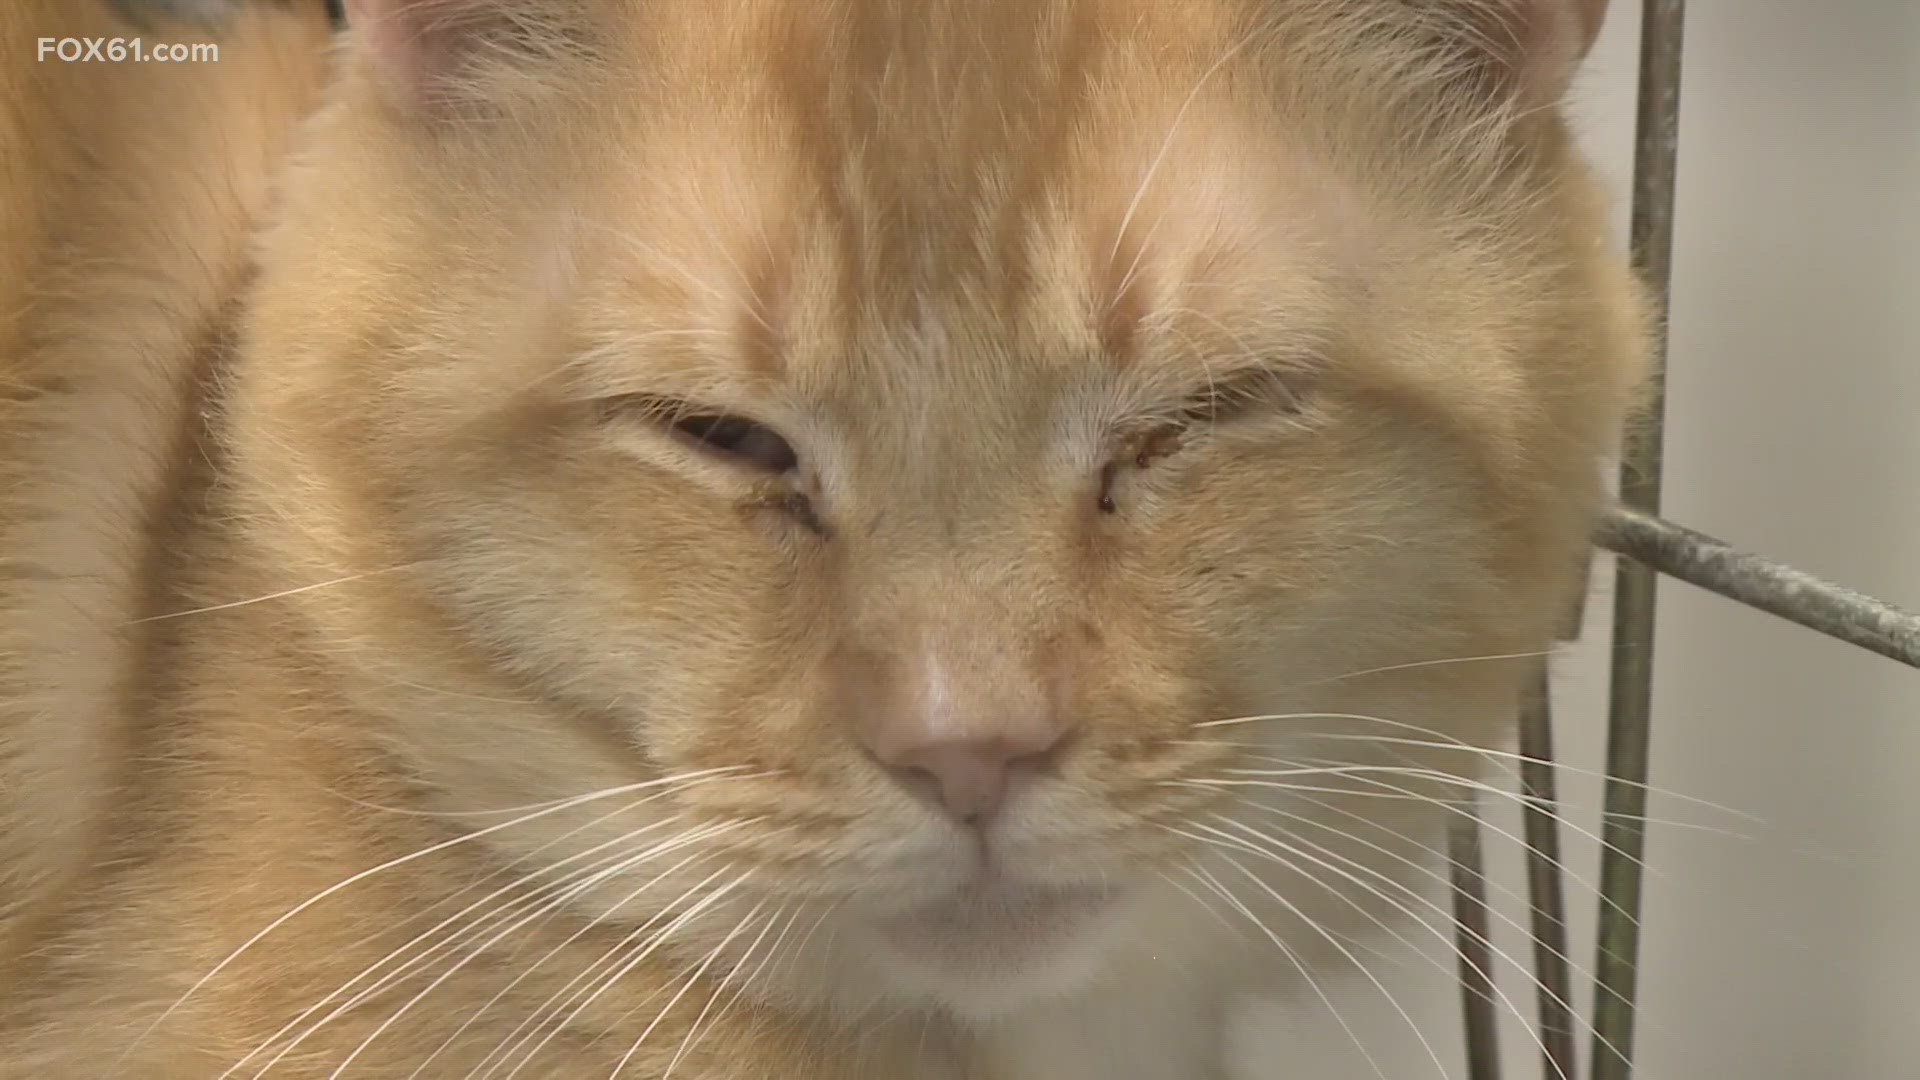 When the cats fully recover, they will be ready for adoption according to officials in Shelton.